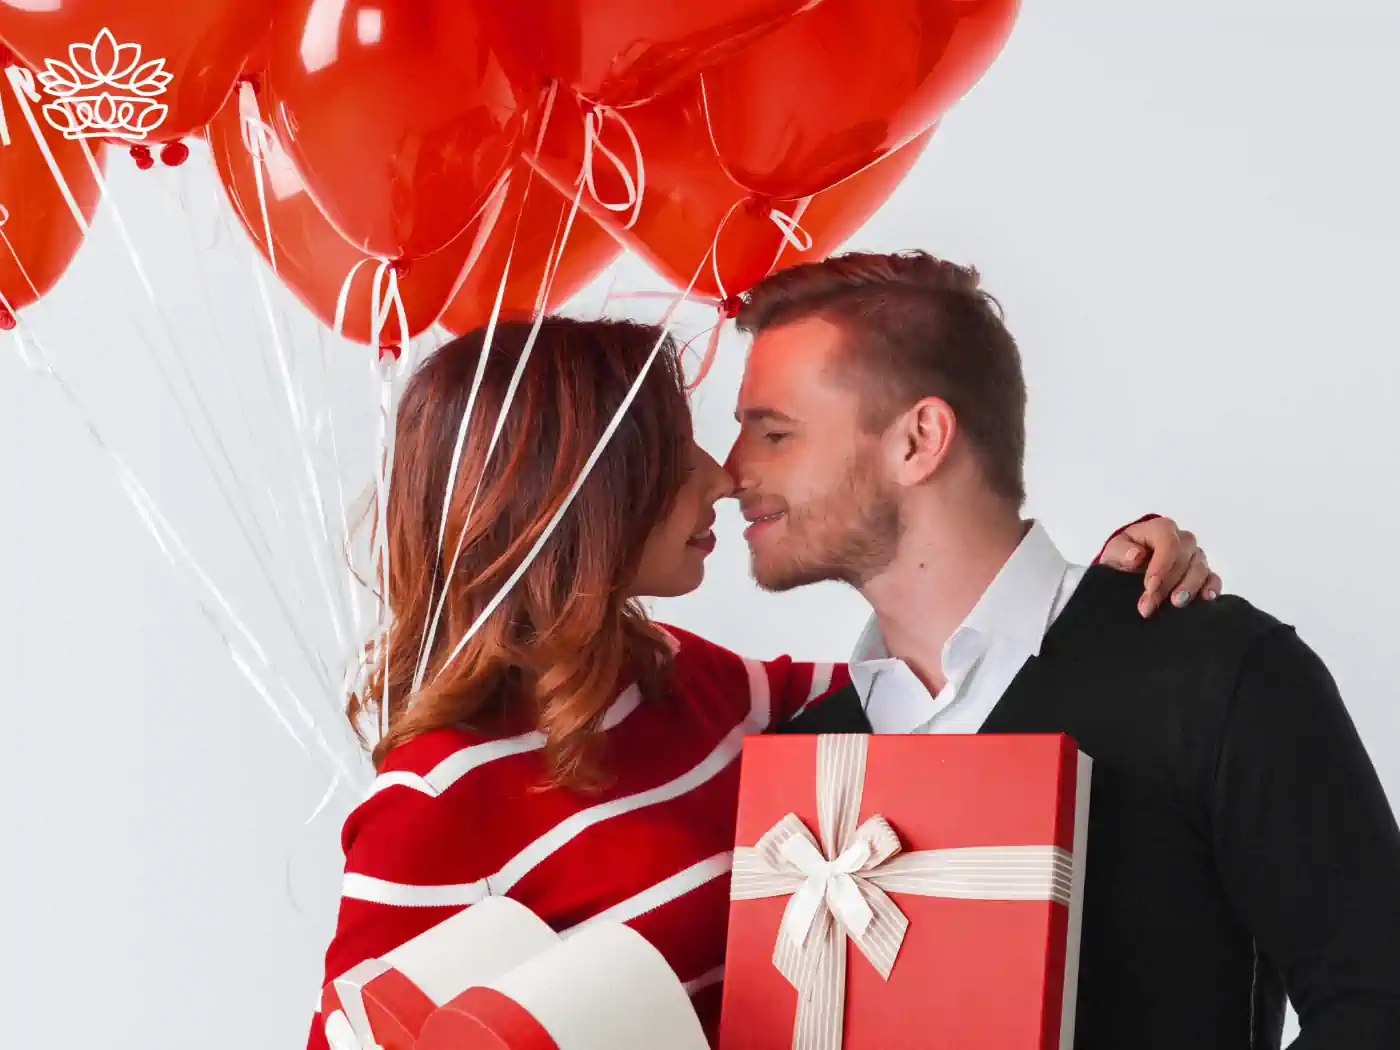 Affectionate couple with Valentine's Day red balloons and a large gift box, sharing a romantic moment. Fabulous Flowers and Gifts.